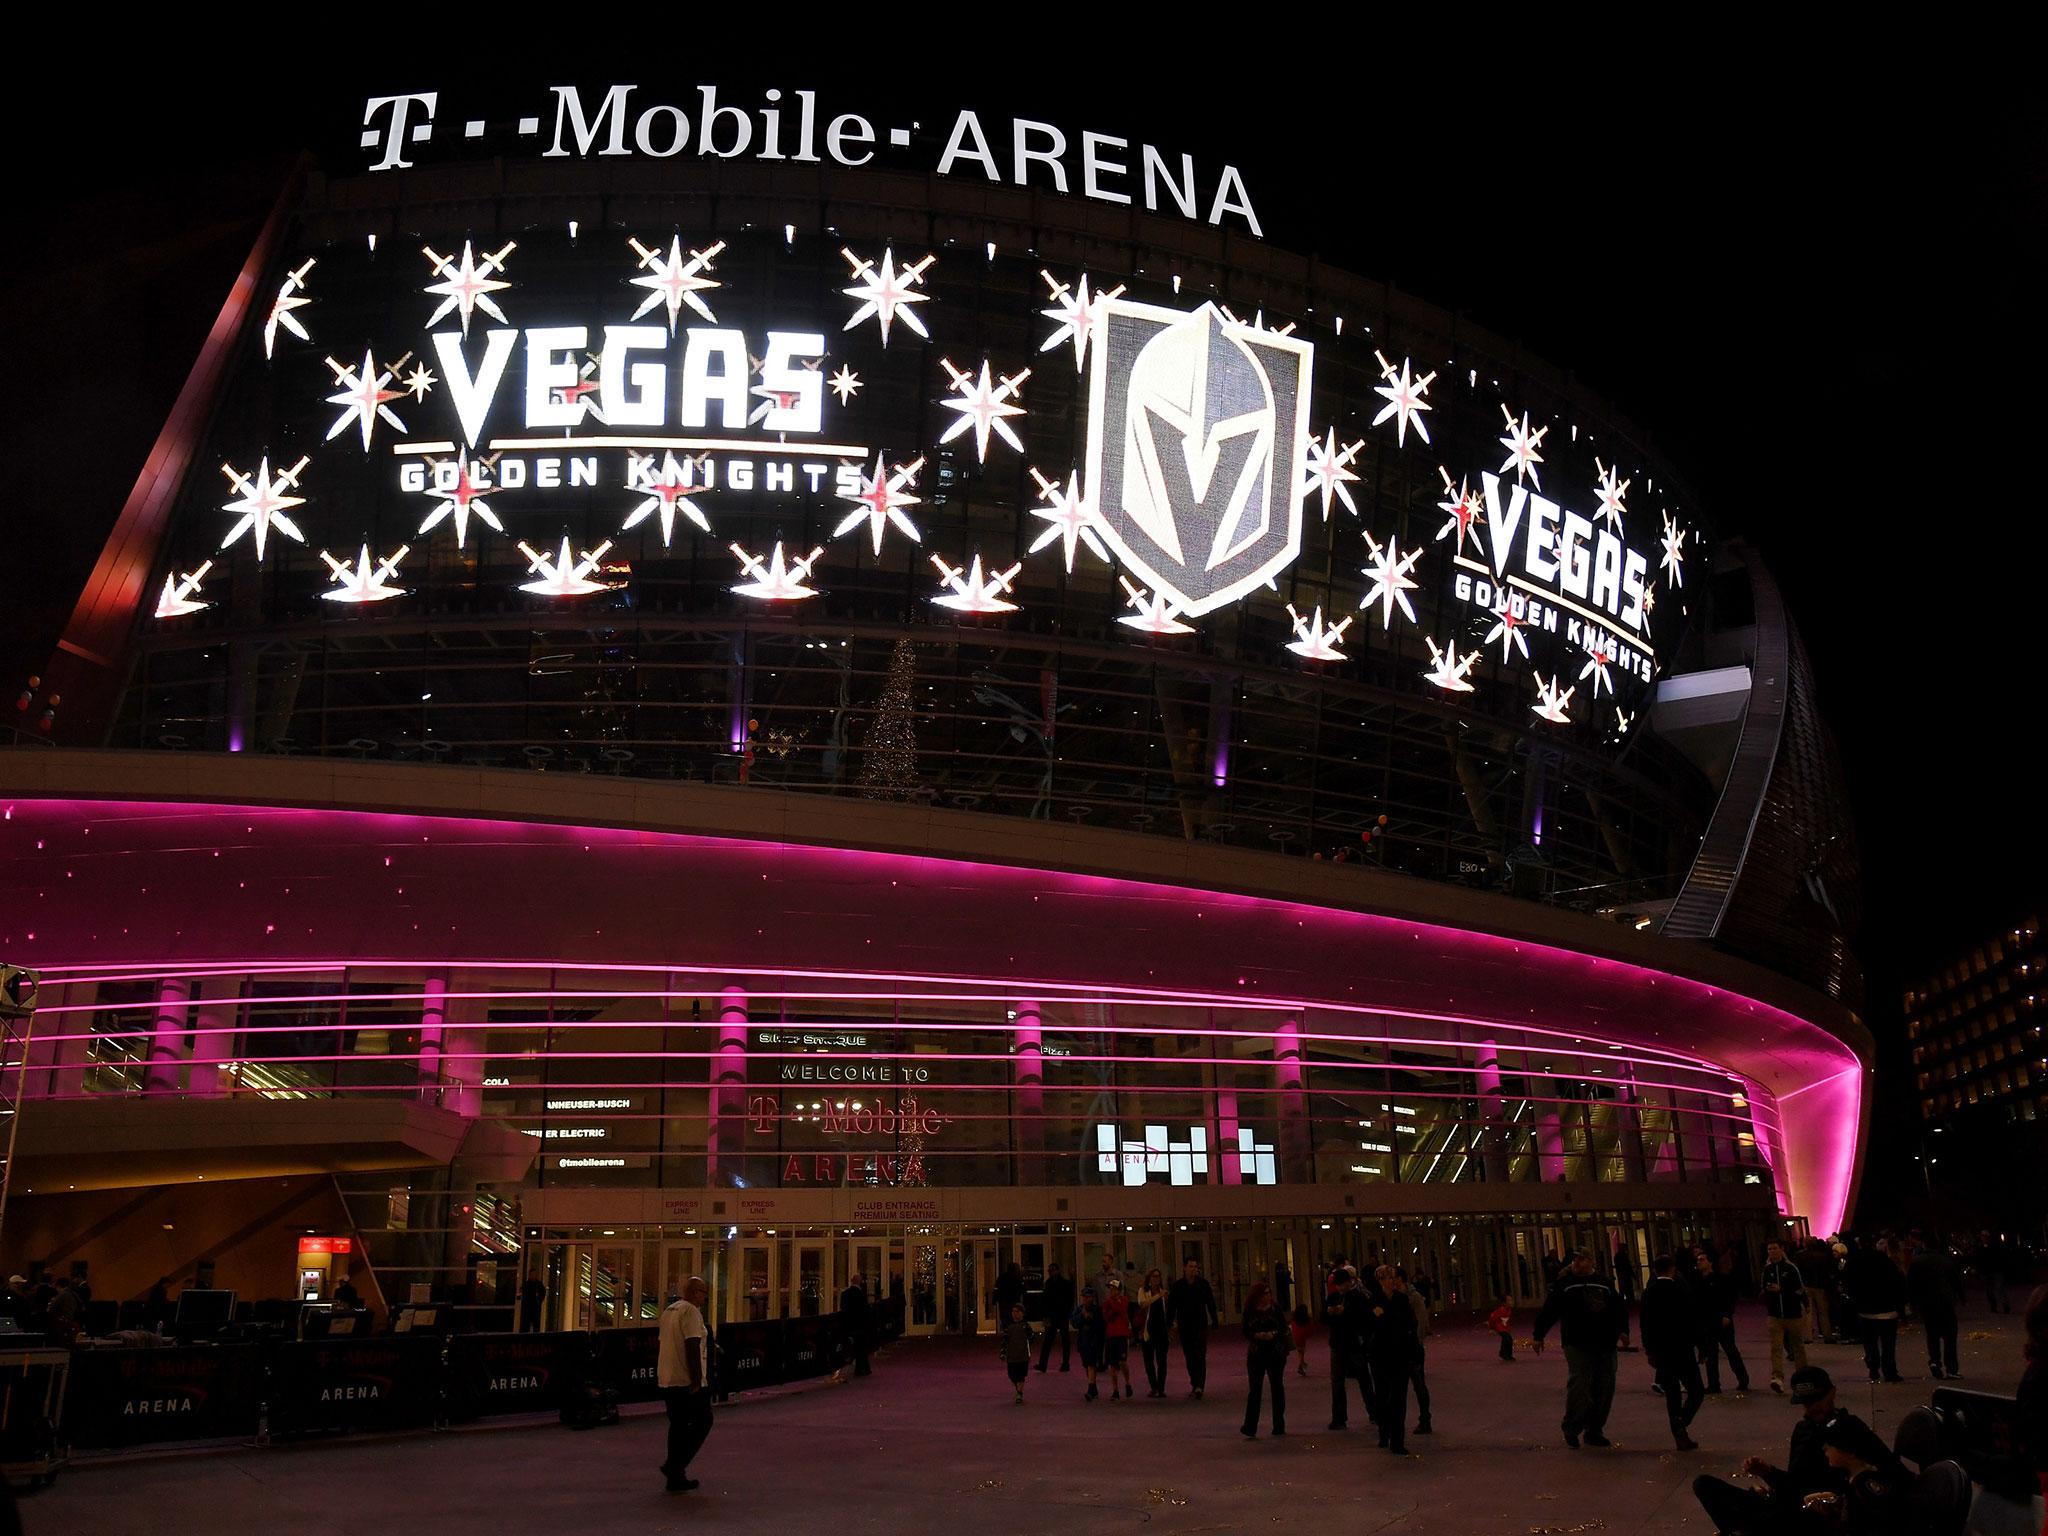 The Vegas Golden Knight franchise was unveiled late last year